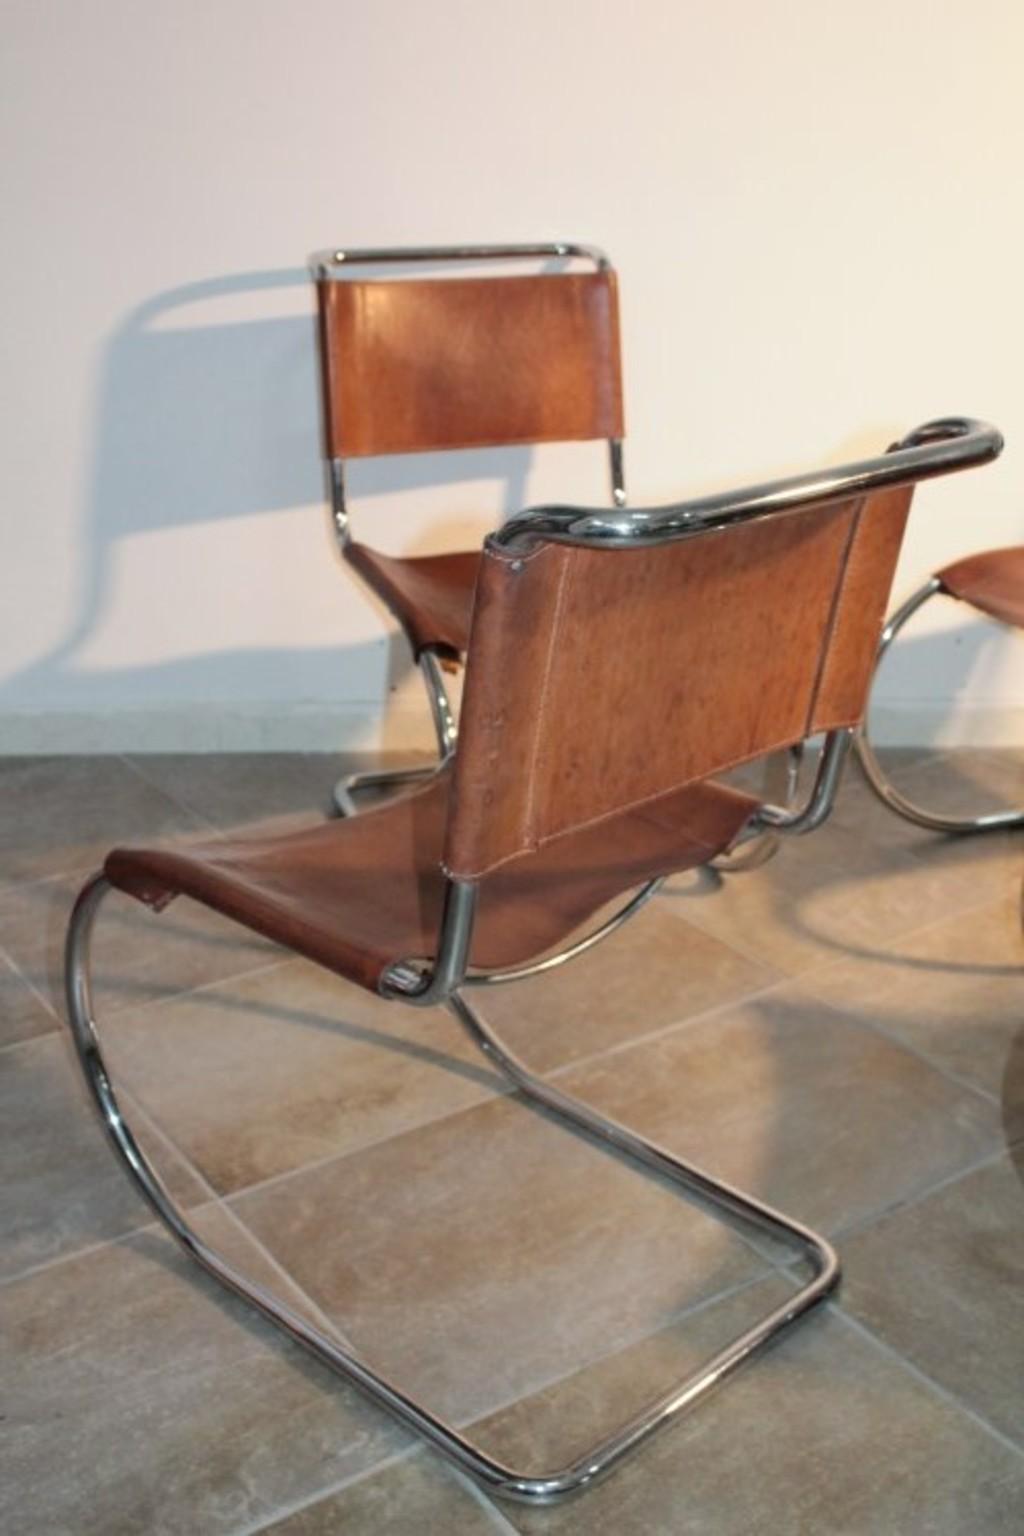 Vintage Mies van der Rohe cantilever chairs with chromed metal structures and brown leather seats. We love the spirit of Bauhaus in this design. The leather shows the signs of aging and some seams are missing.